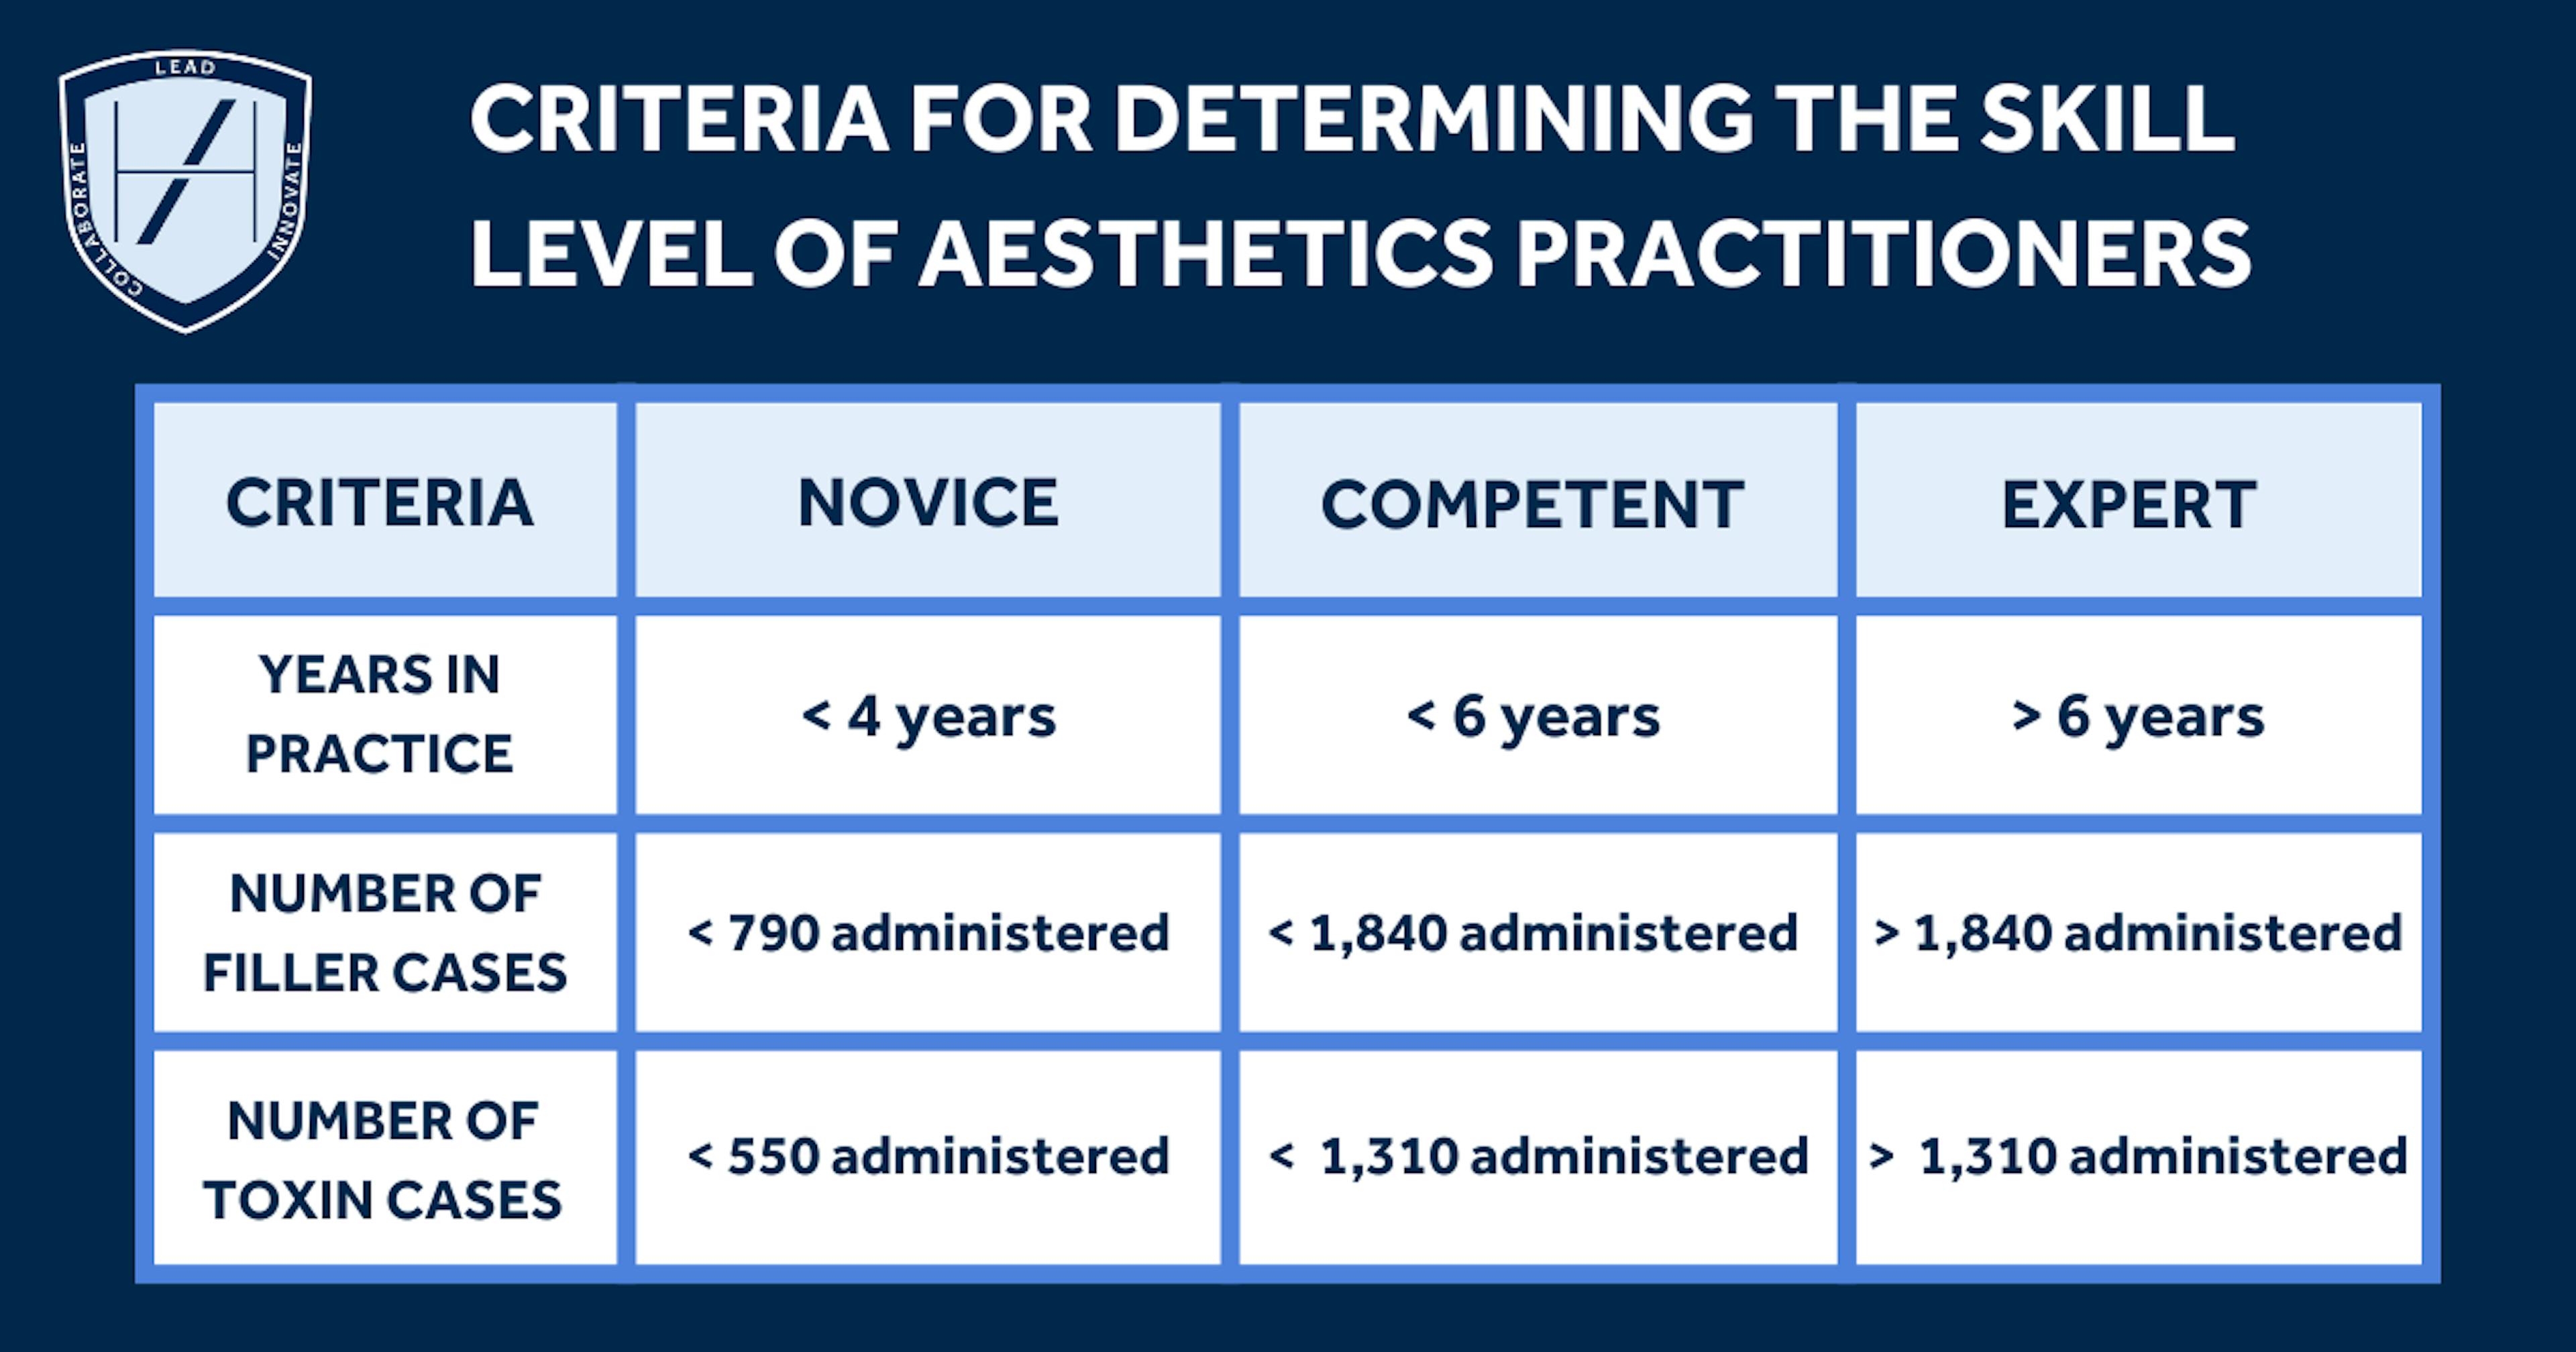 chart criteria for determining skill level of medical aesthetics practitioners 